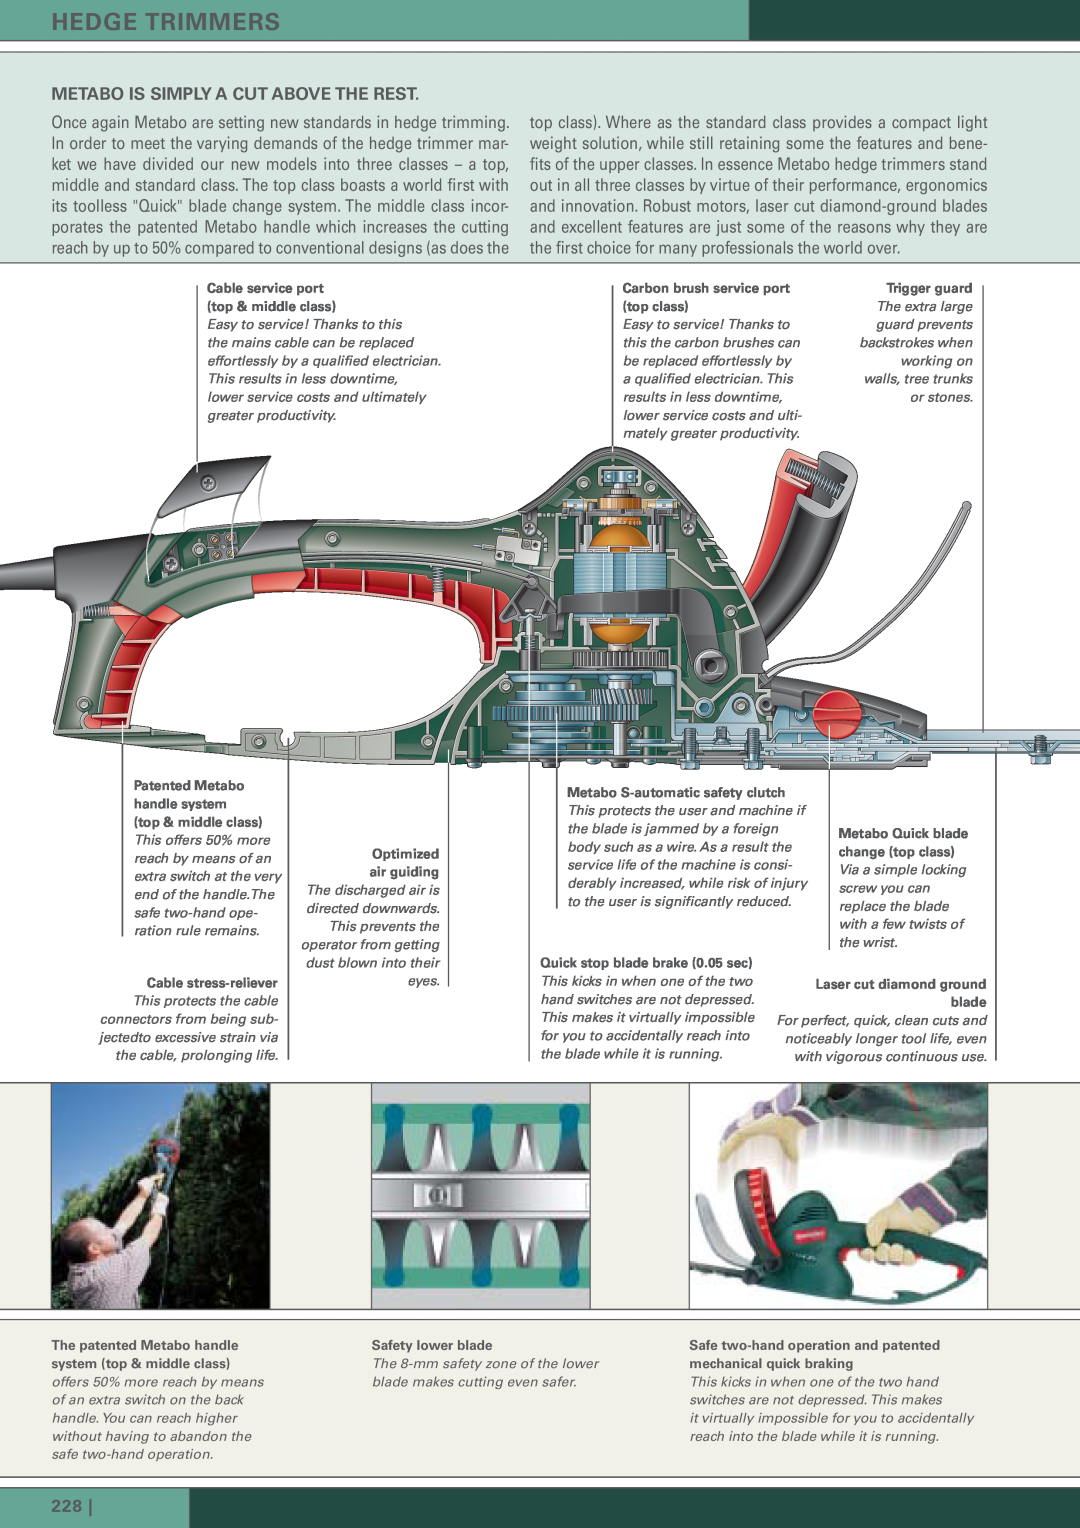 Metabo HS-8565, HS-8555 Metabo Is Simply A Cut Above The Rest, 228, Hedge Trimmers, Cable service port top & middle class 